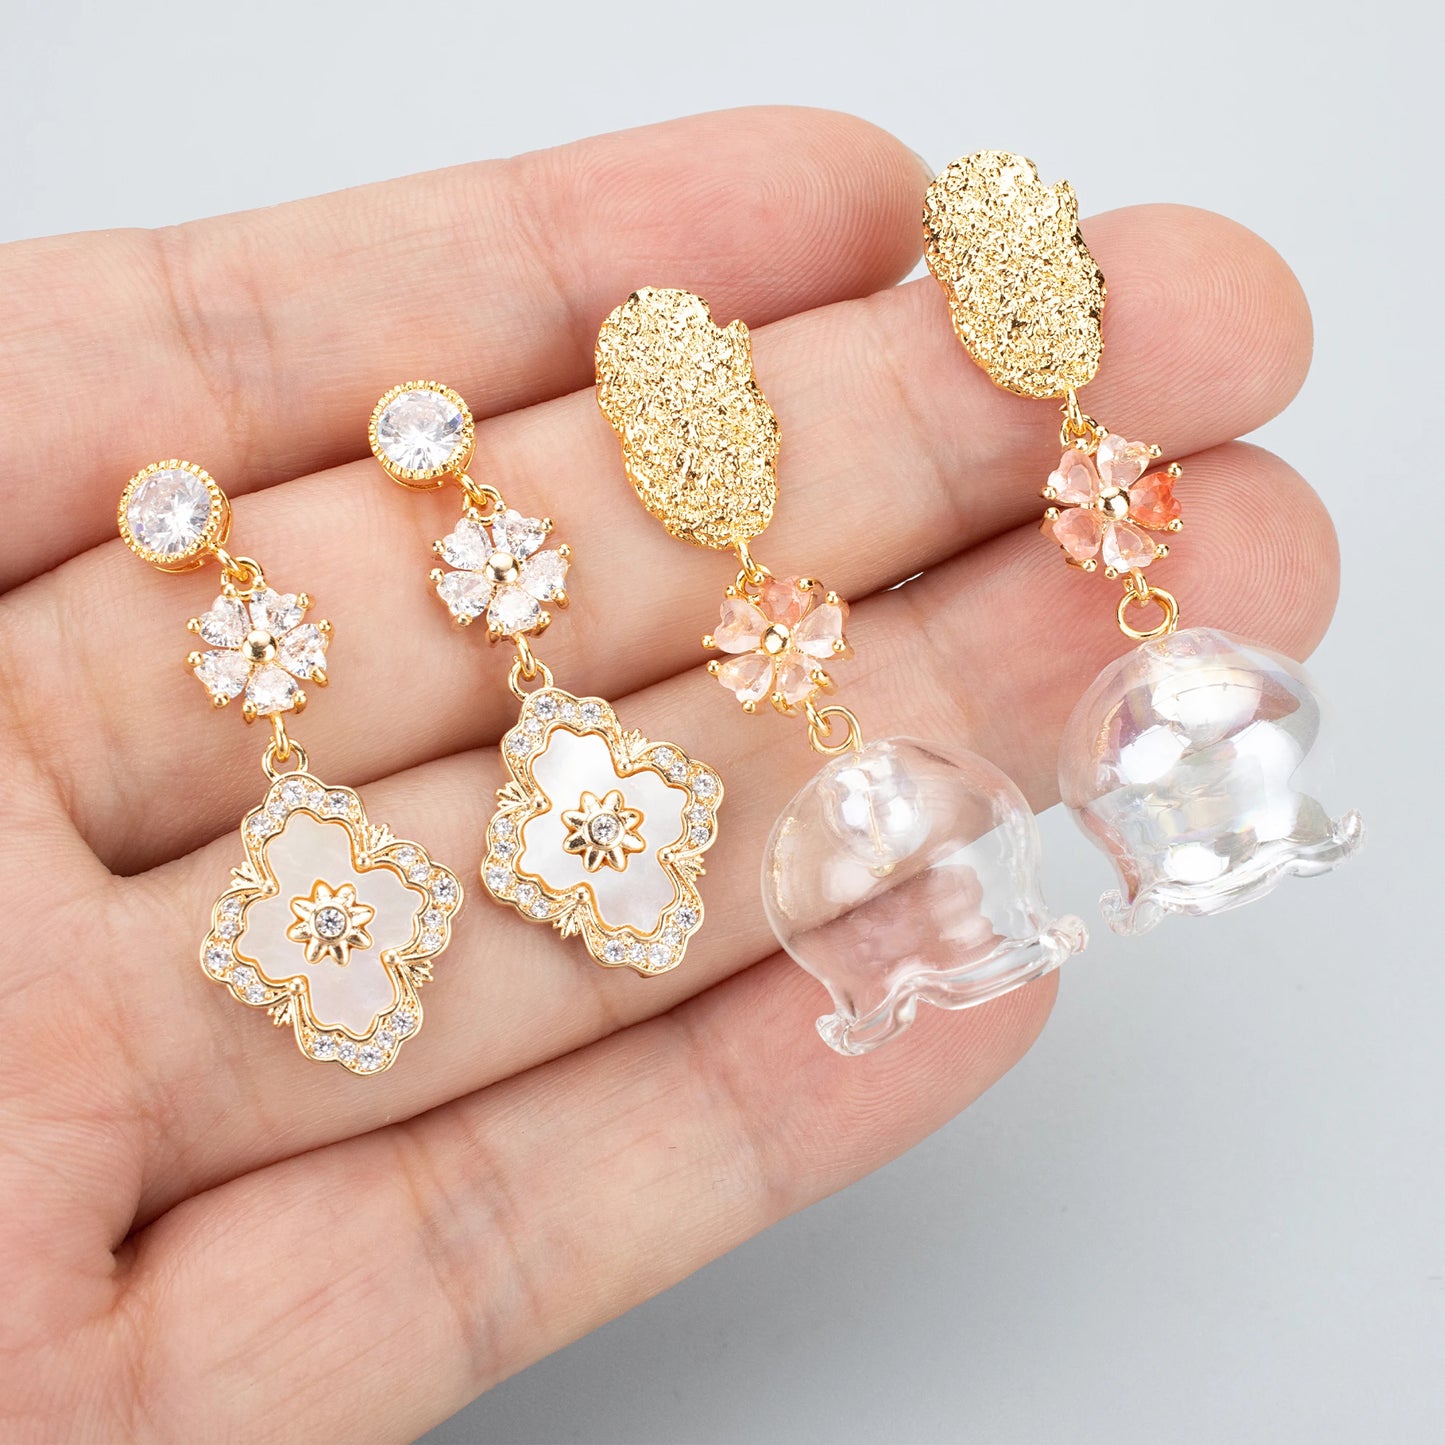 GUFEATHER MD36,jewelry accessories,18k gold plated,copper,zircons,flower shape,charms,jewelry making,diy pendants,6pcs/lot